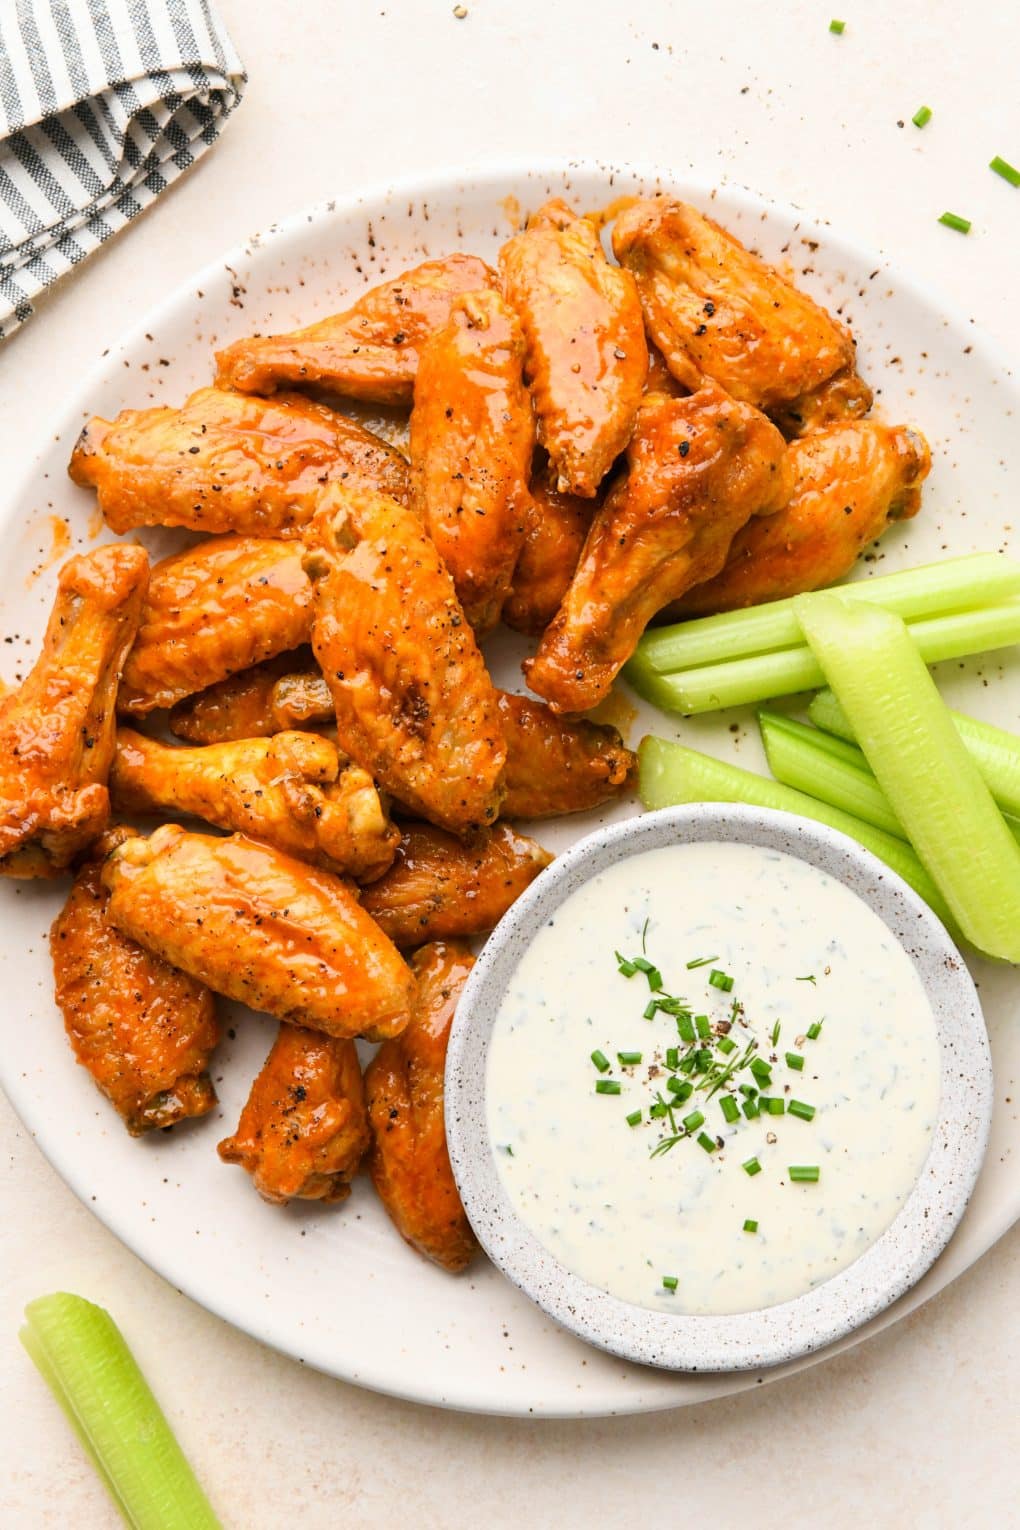 Crispy Baked Buffalo Chicken Wings on a speckled platter with celery sticks and a small bowl of creamy ranch dressing.